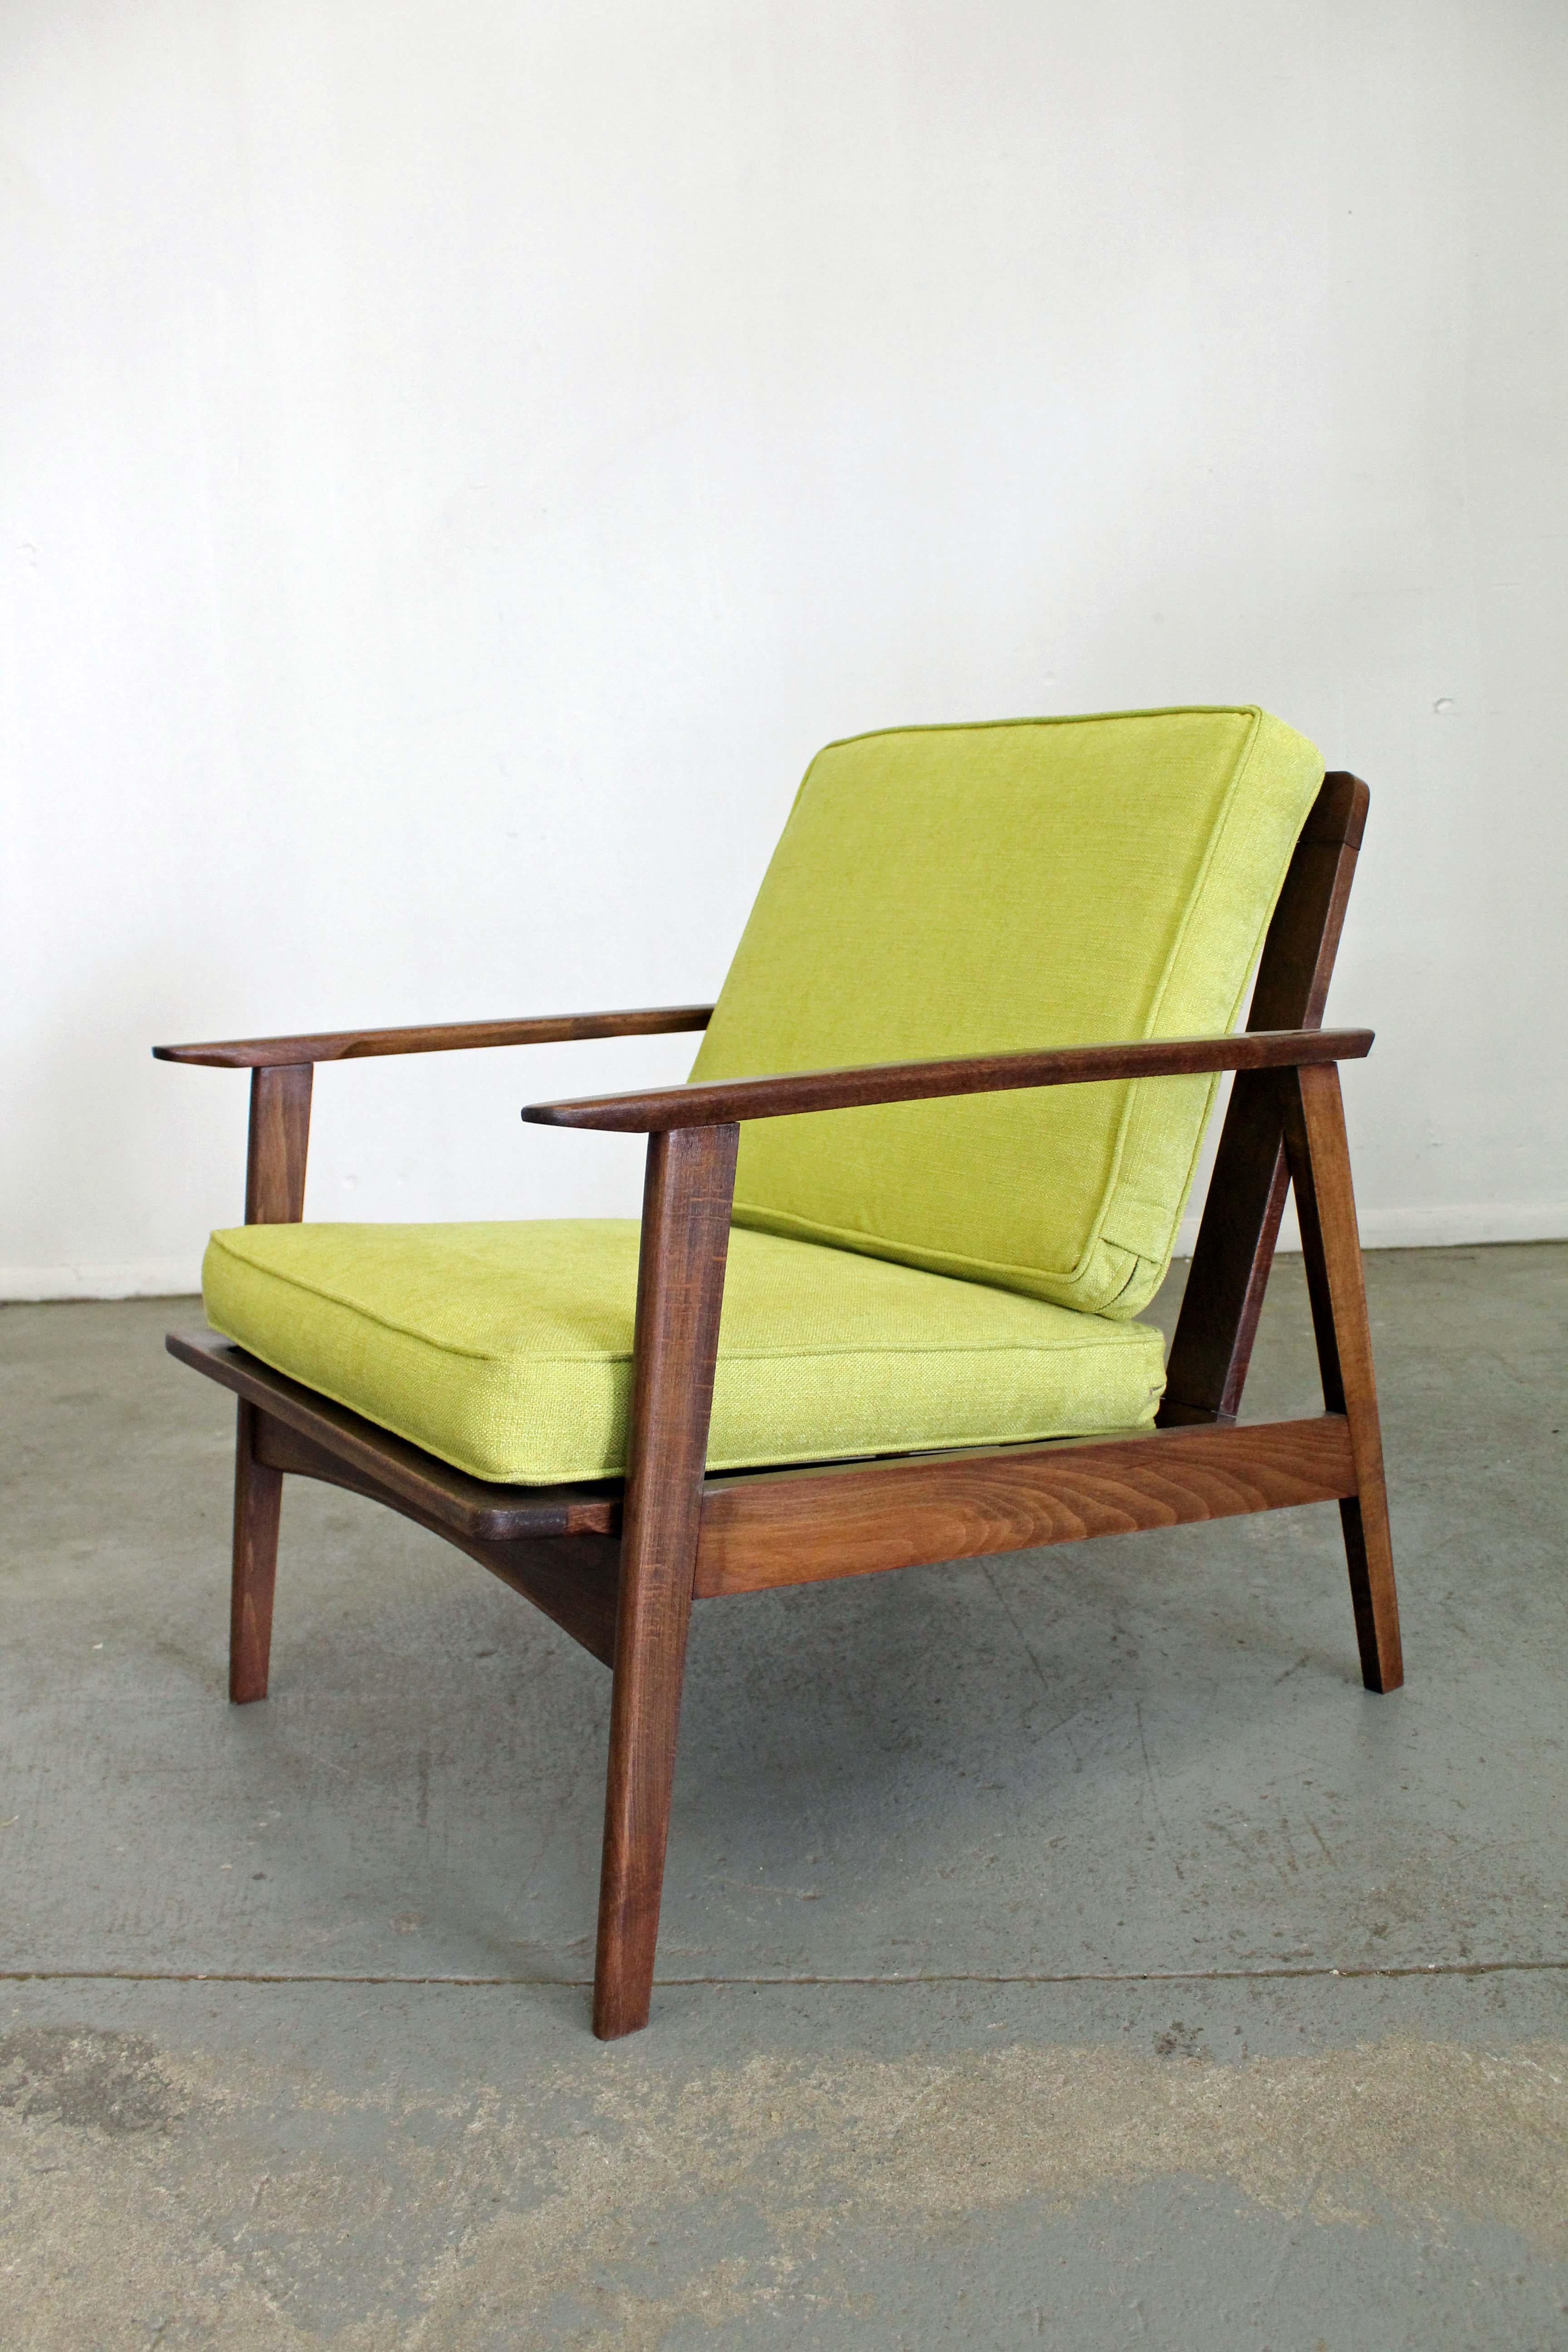 Offered is a Mid-Century Modern open arm lounge chair. This piece is made of walnut and has been reupholstered with 'citron' fabric. The chair comes apart for easy shipping and storage. It is in excellent condition for its age (reupholstered,